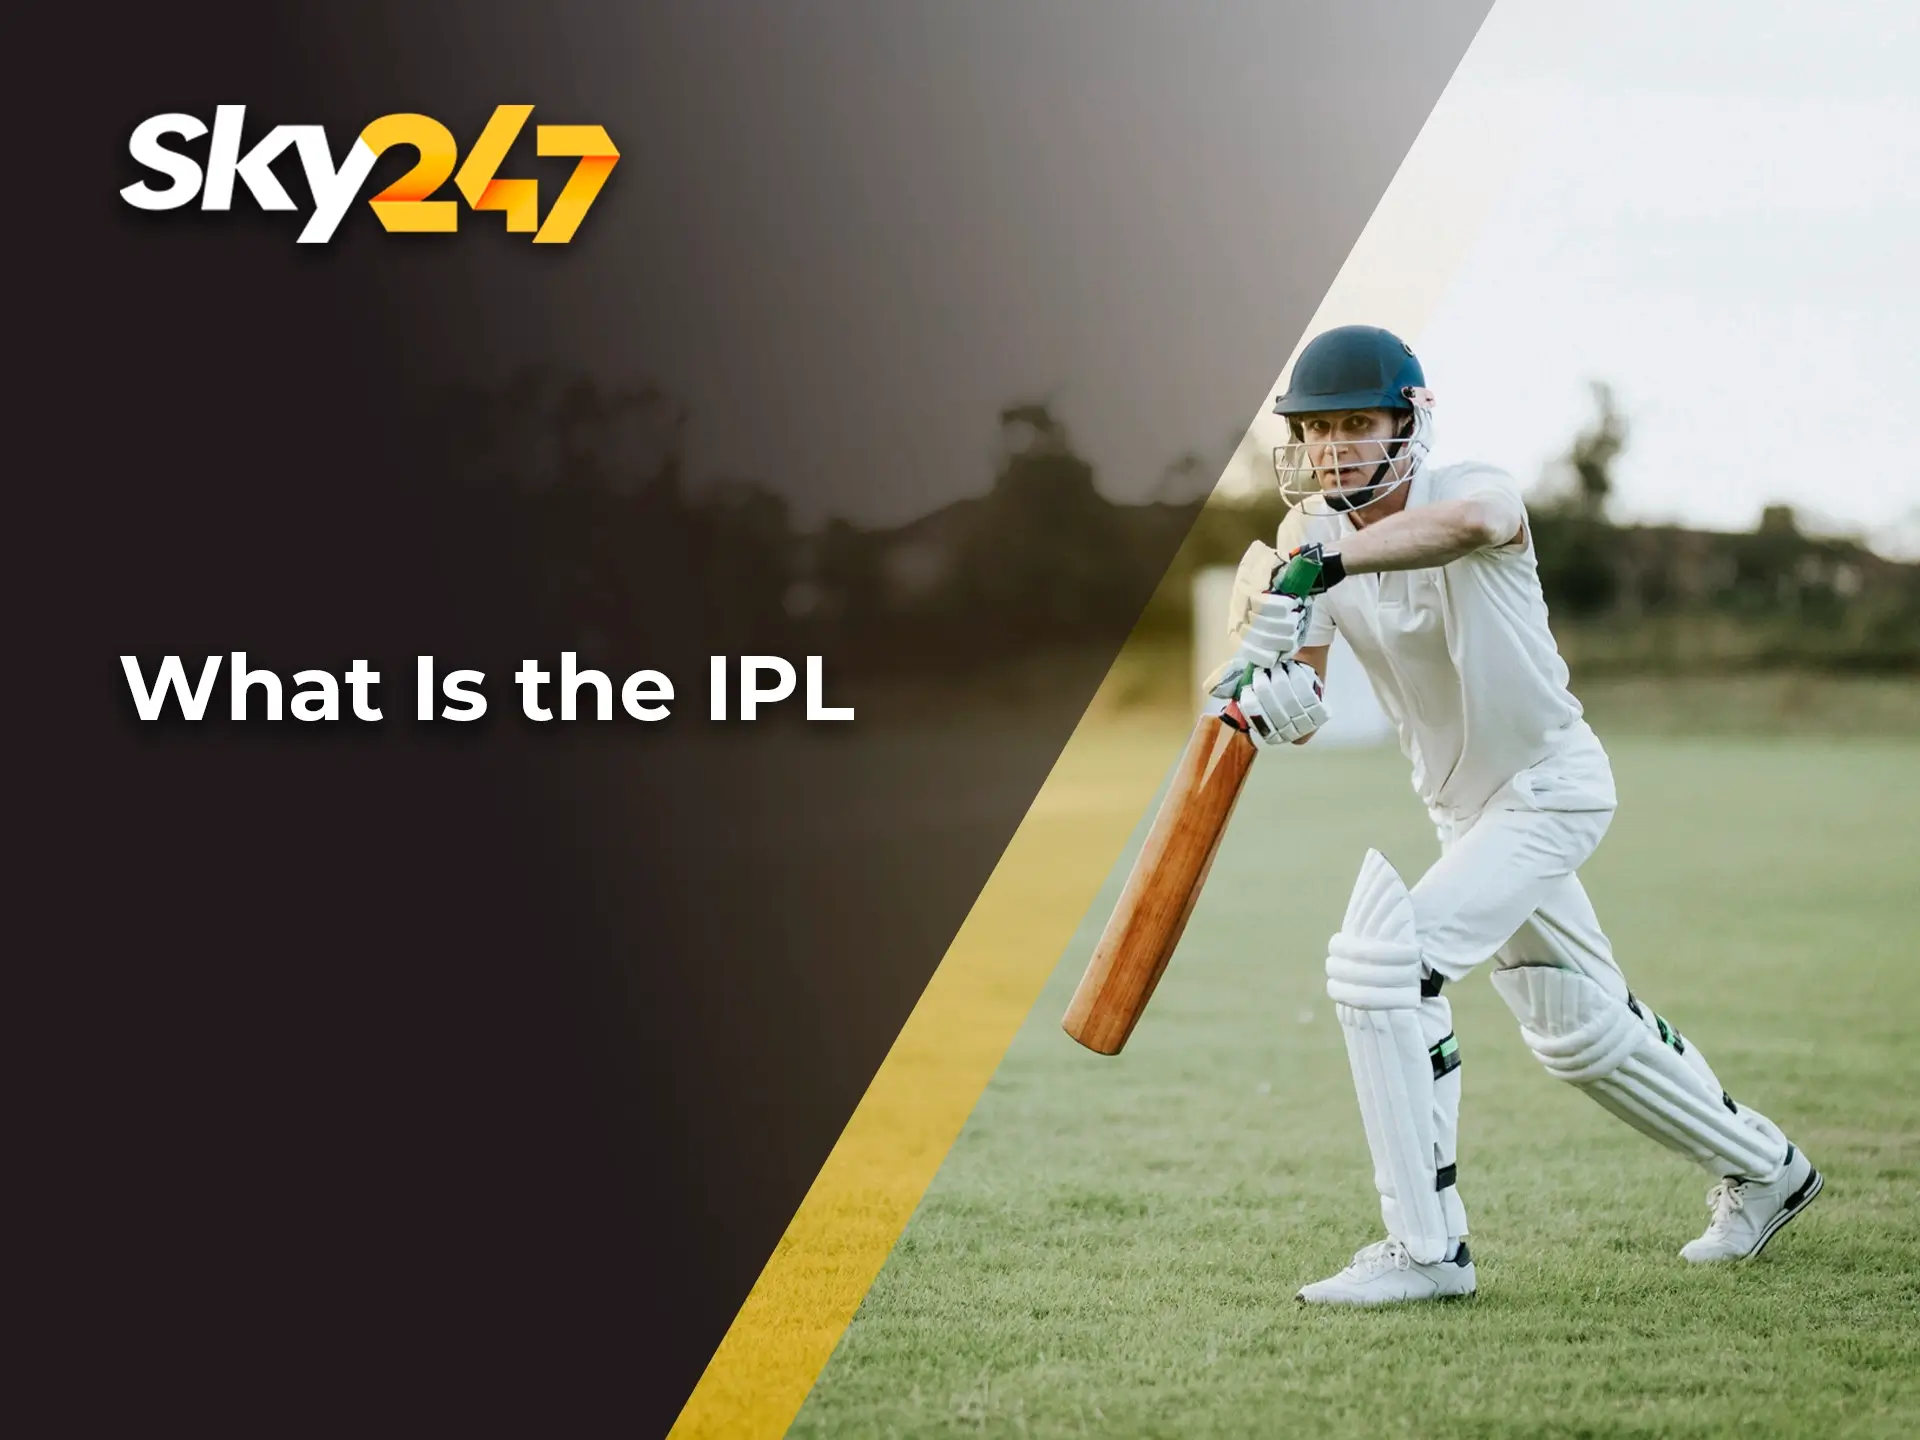 Find out the details of the origin and popularity history of IPL tournament in India with Sky247.